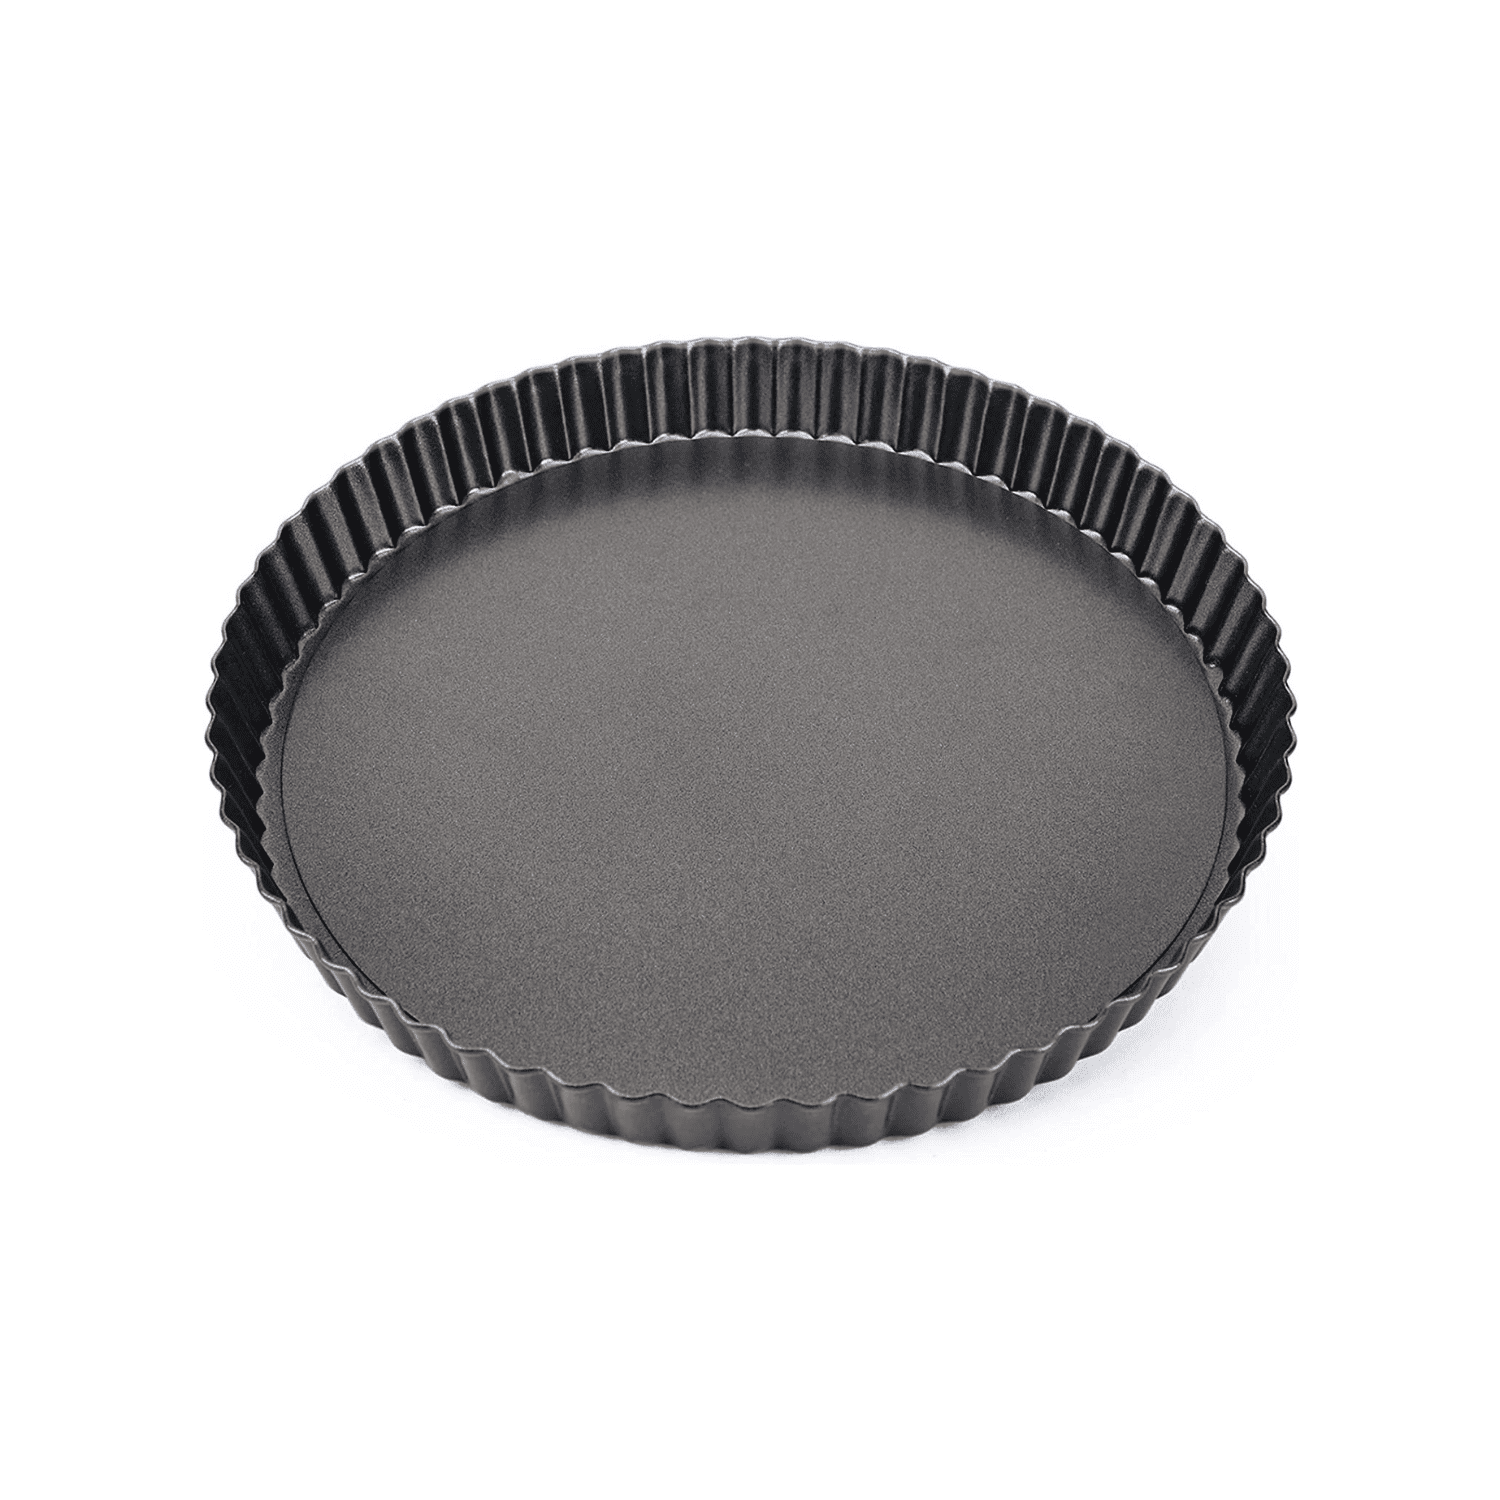 10 Inch Tart Pan with Removable Bottom